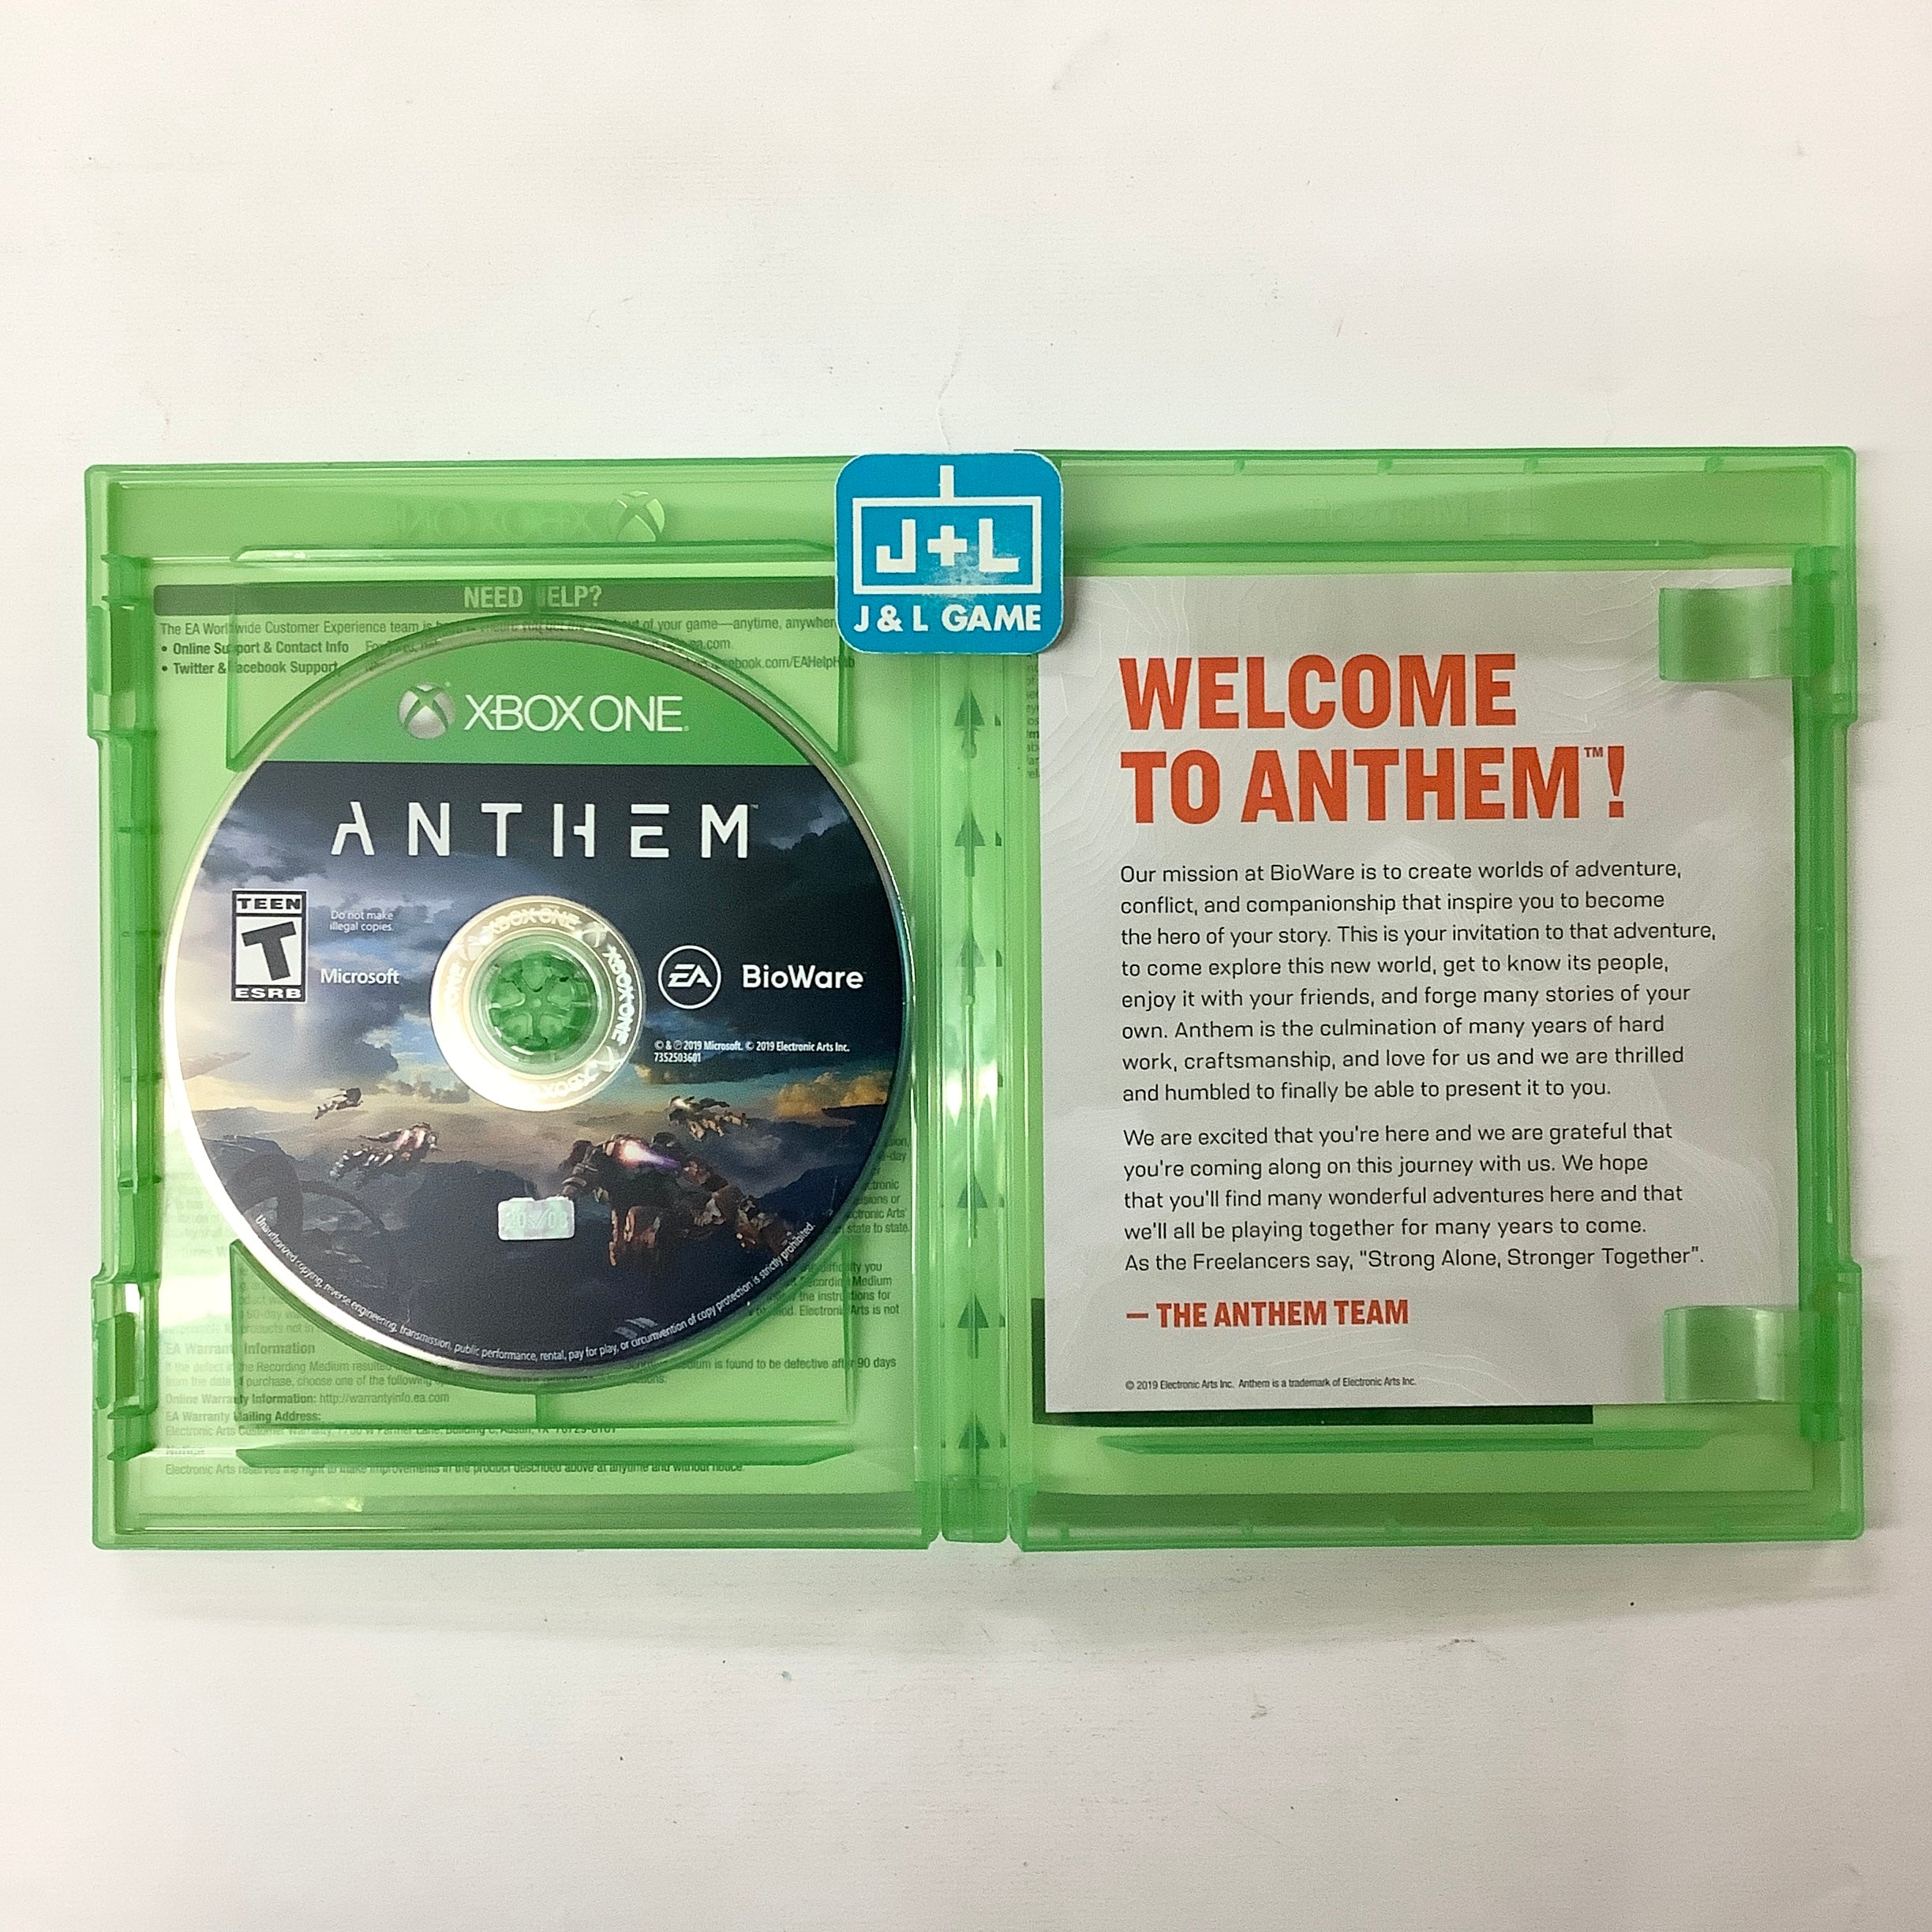 Anthem - (XB1) Xbox One [Pre-Owned] Video Games Electronic Arts   